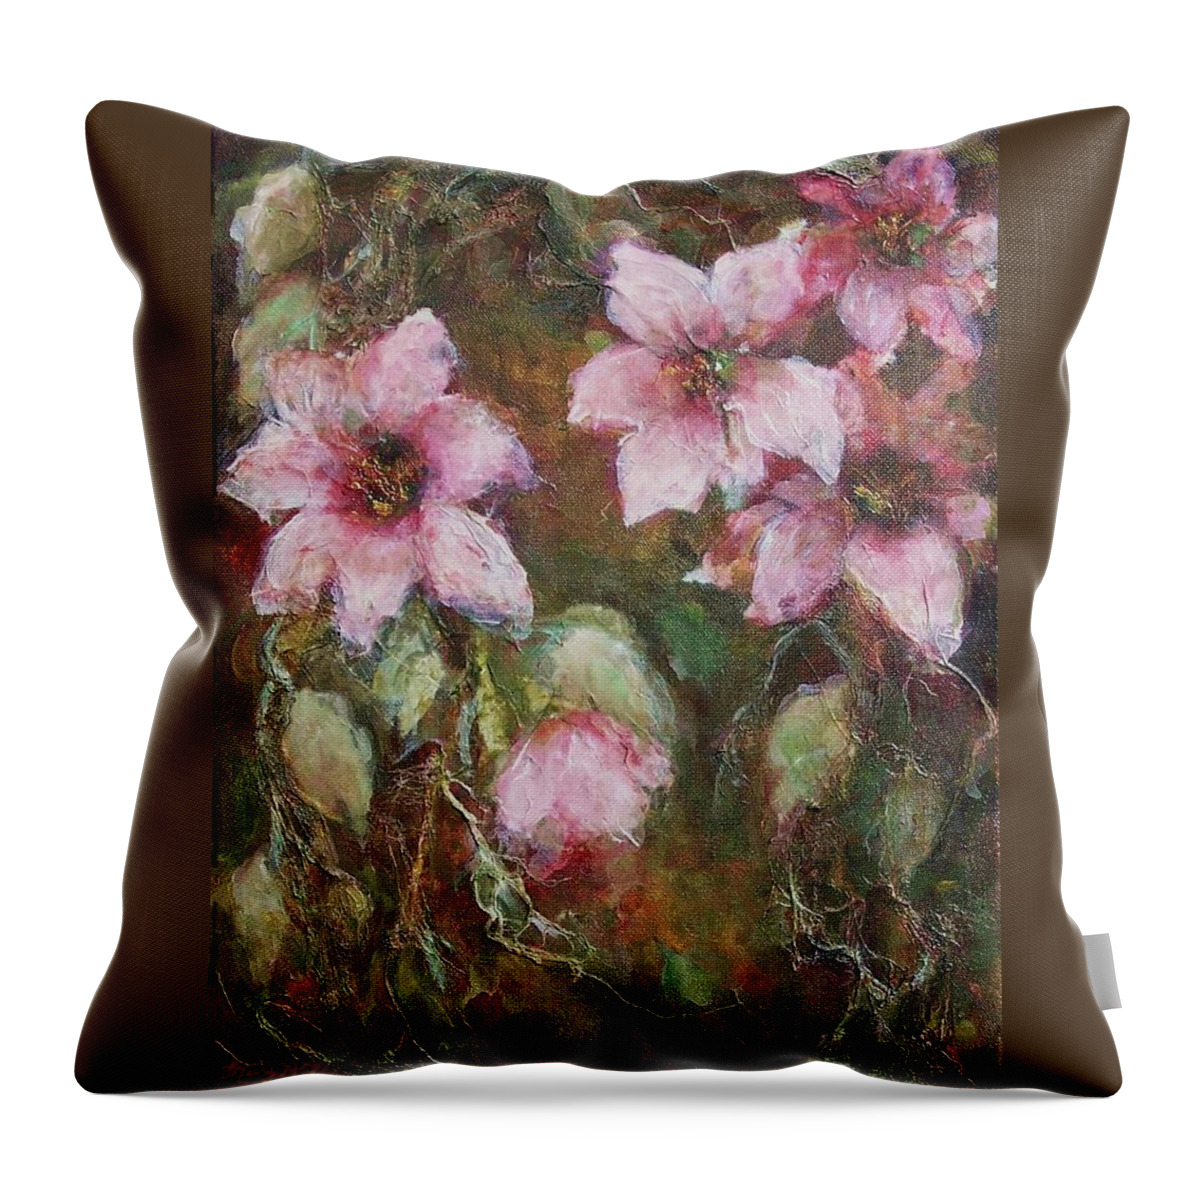 Floral Throw Pillow featuring the painting Romance by Mary Wolf